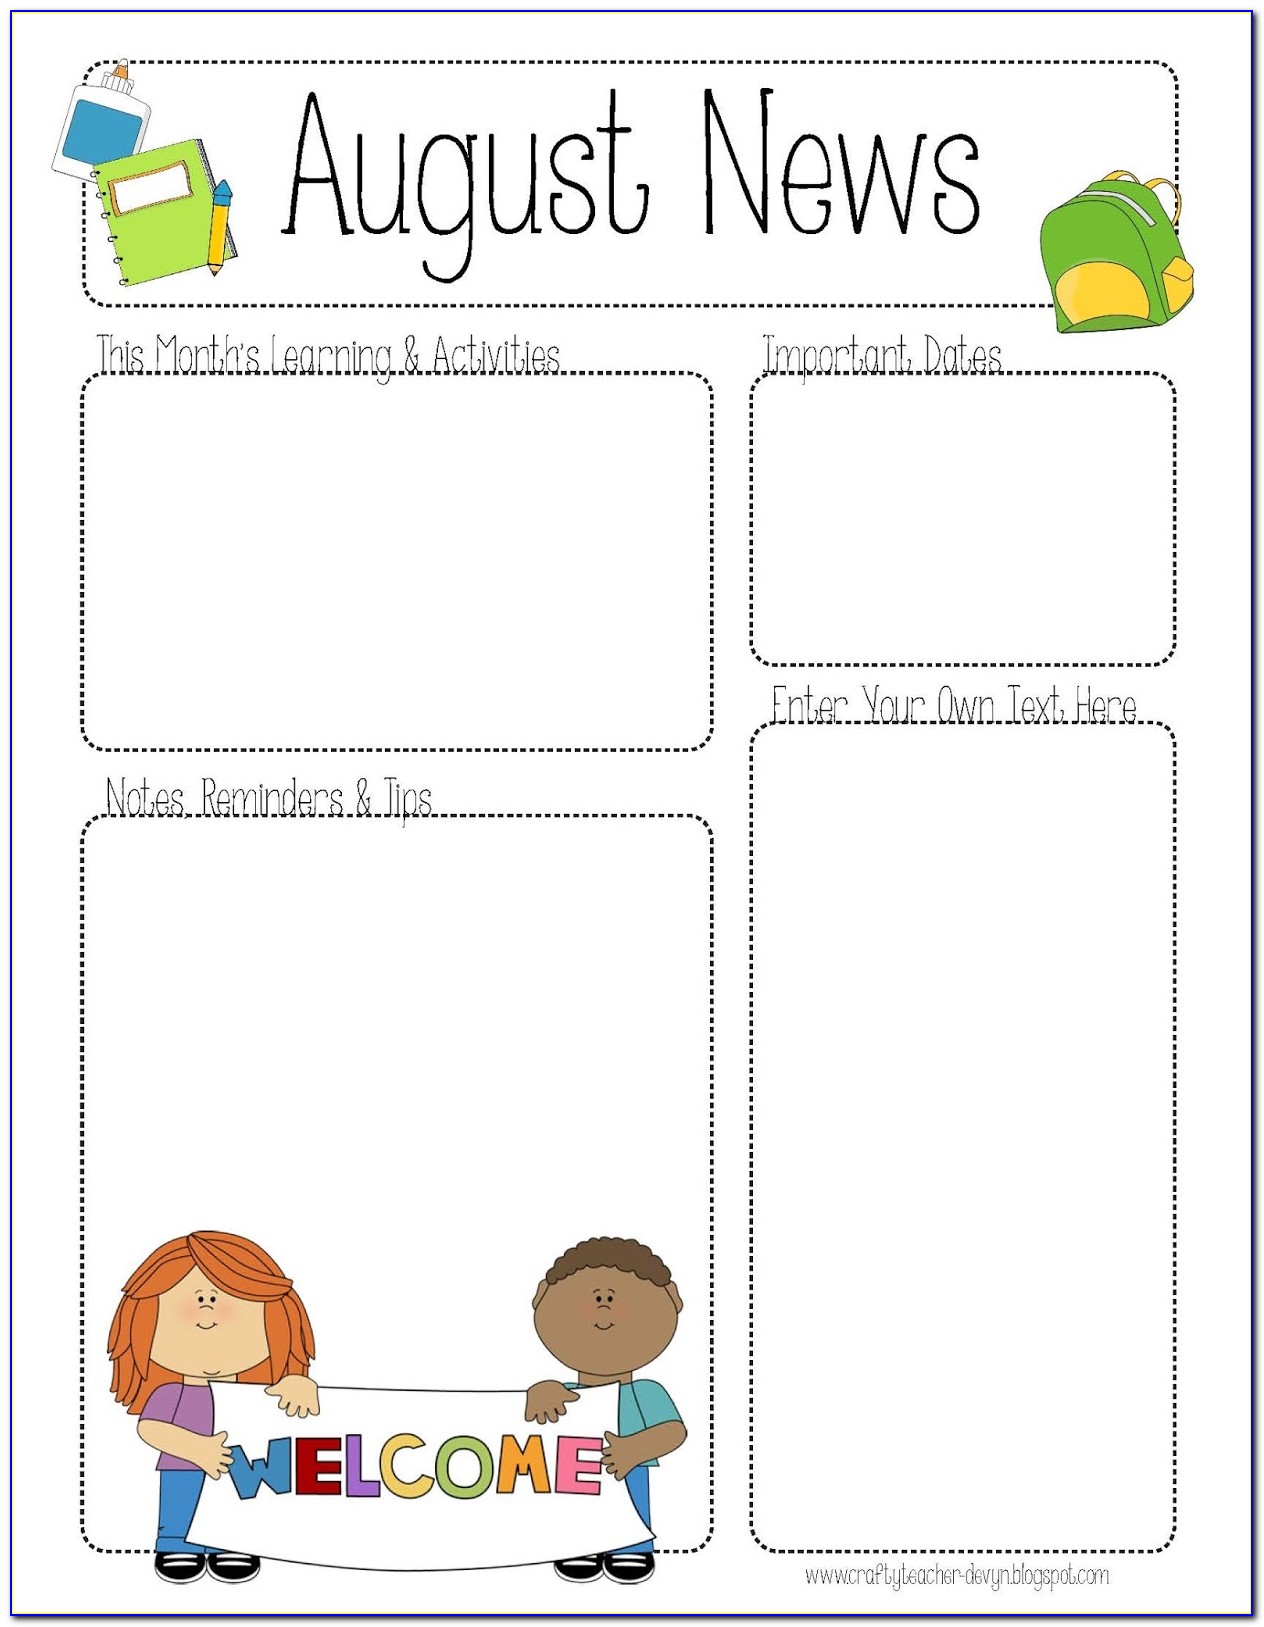 Free Printable Weekly Newsletter Templates For Teachers